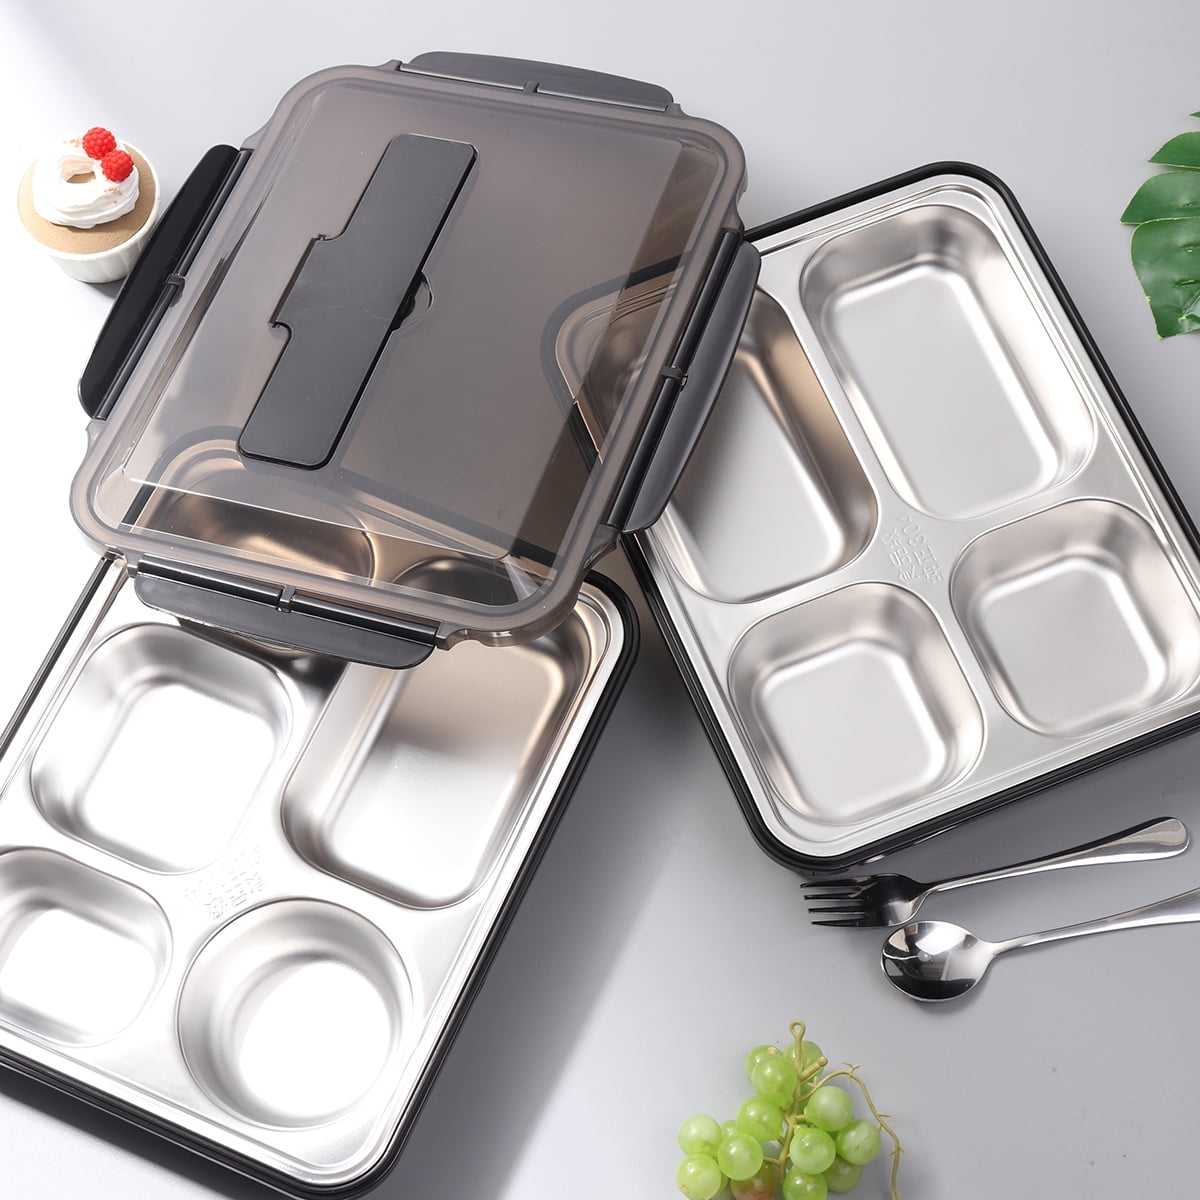 Psychedelic Veggy Bento Box with Band and Utensils – Campground Flex